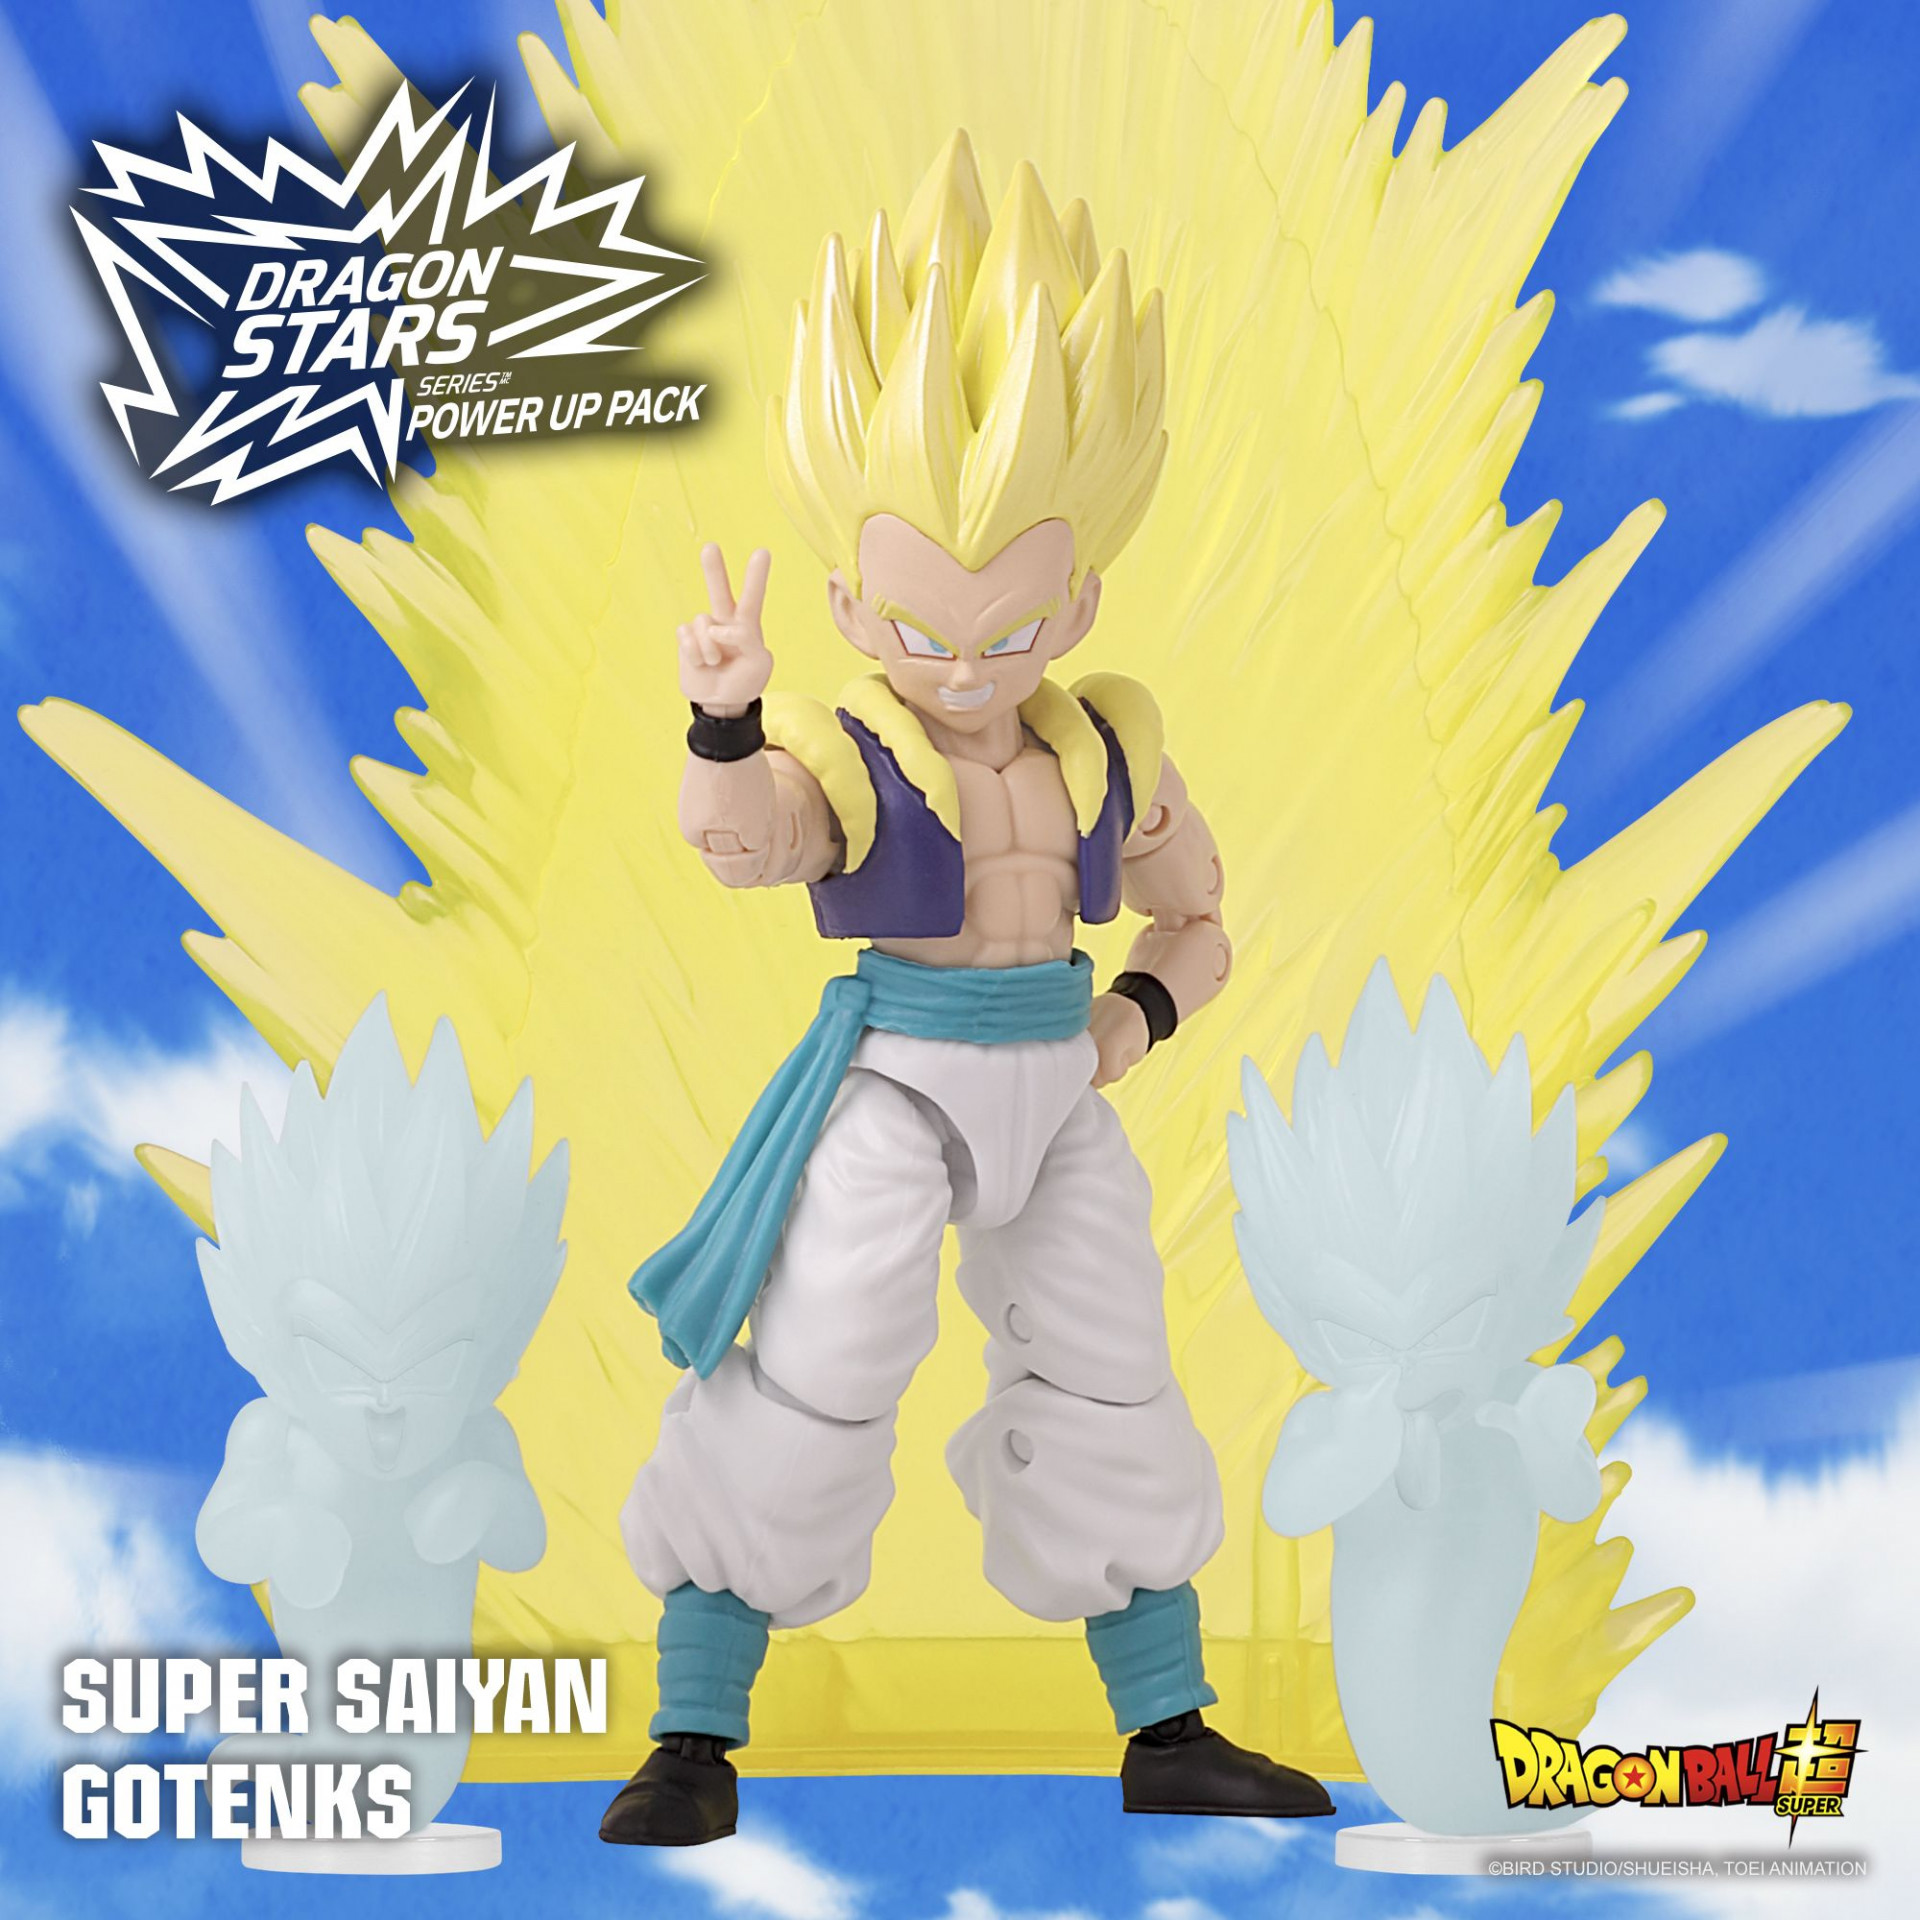 Super Saiyan Gotenks is Coming to the Dragon Stars Series Power Up Pack!